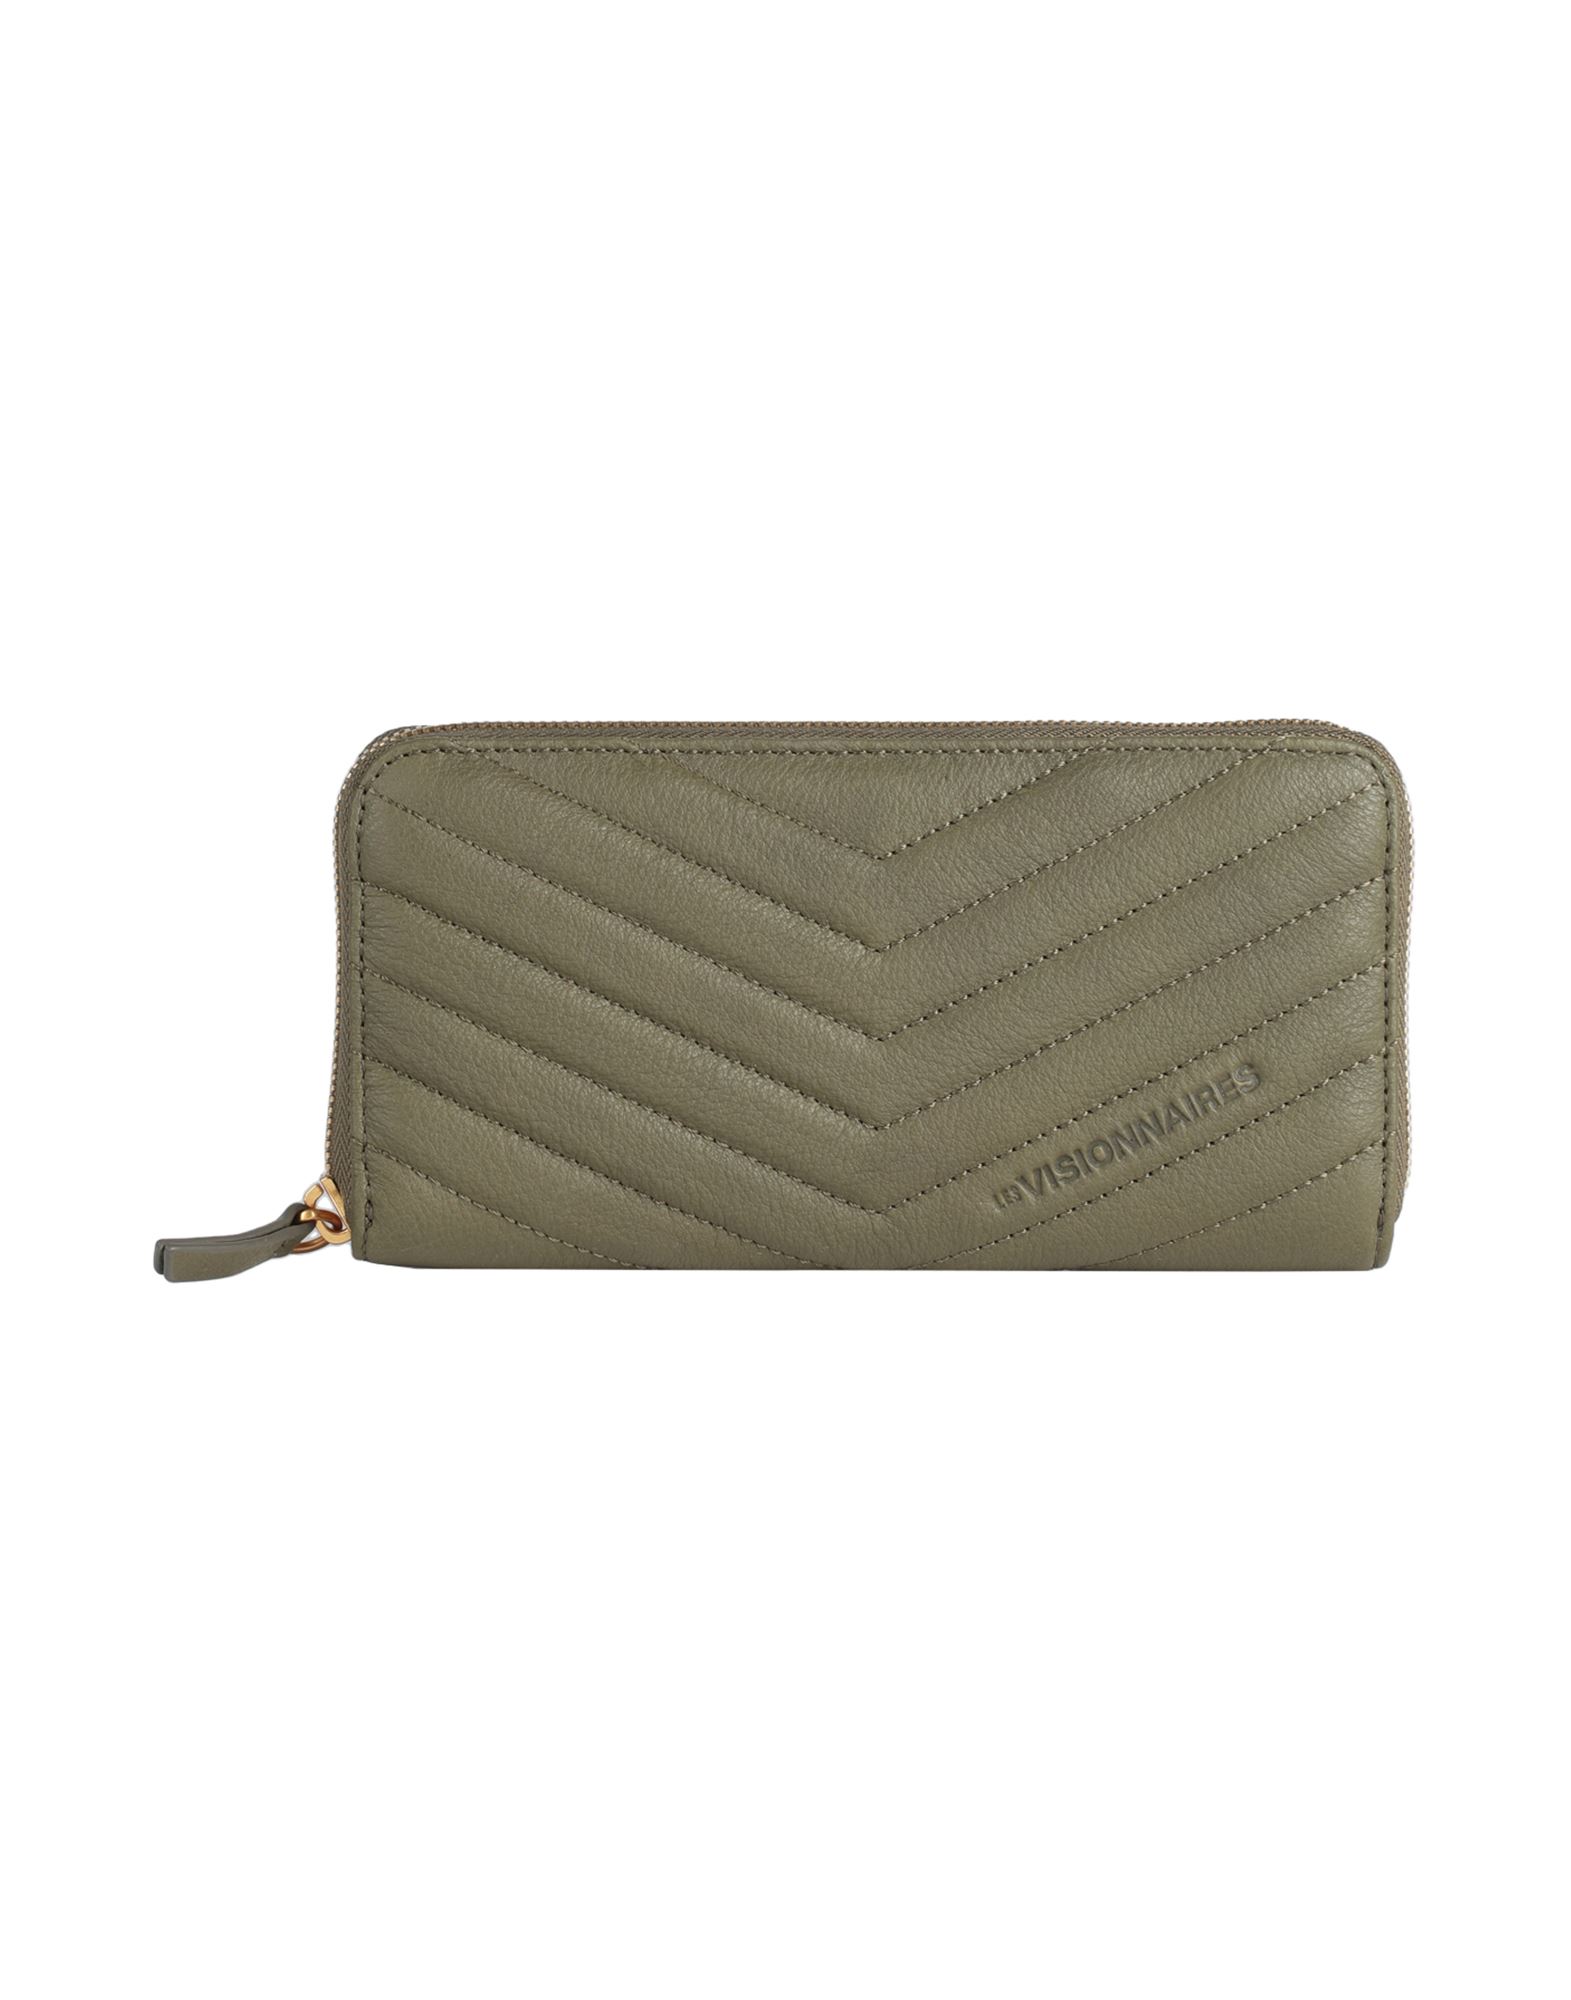 Les Visionnaires Wallets In Green